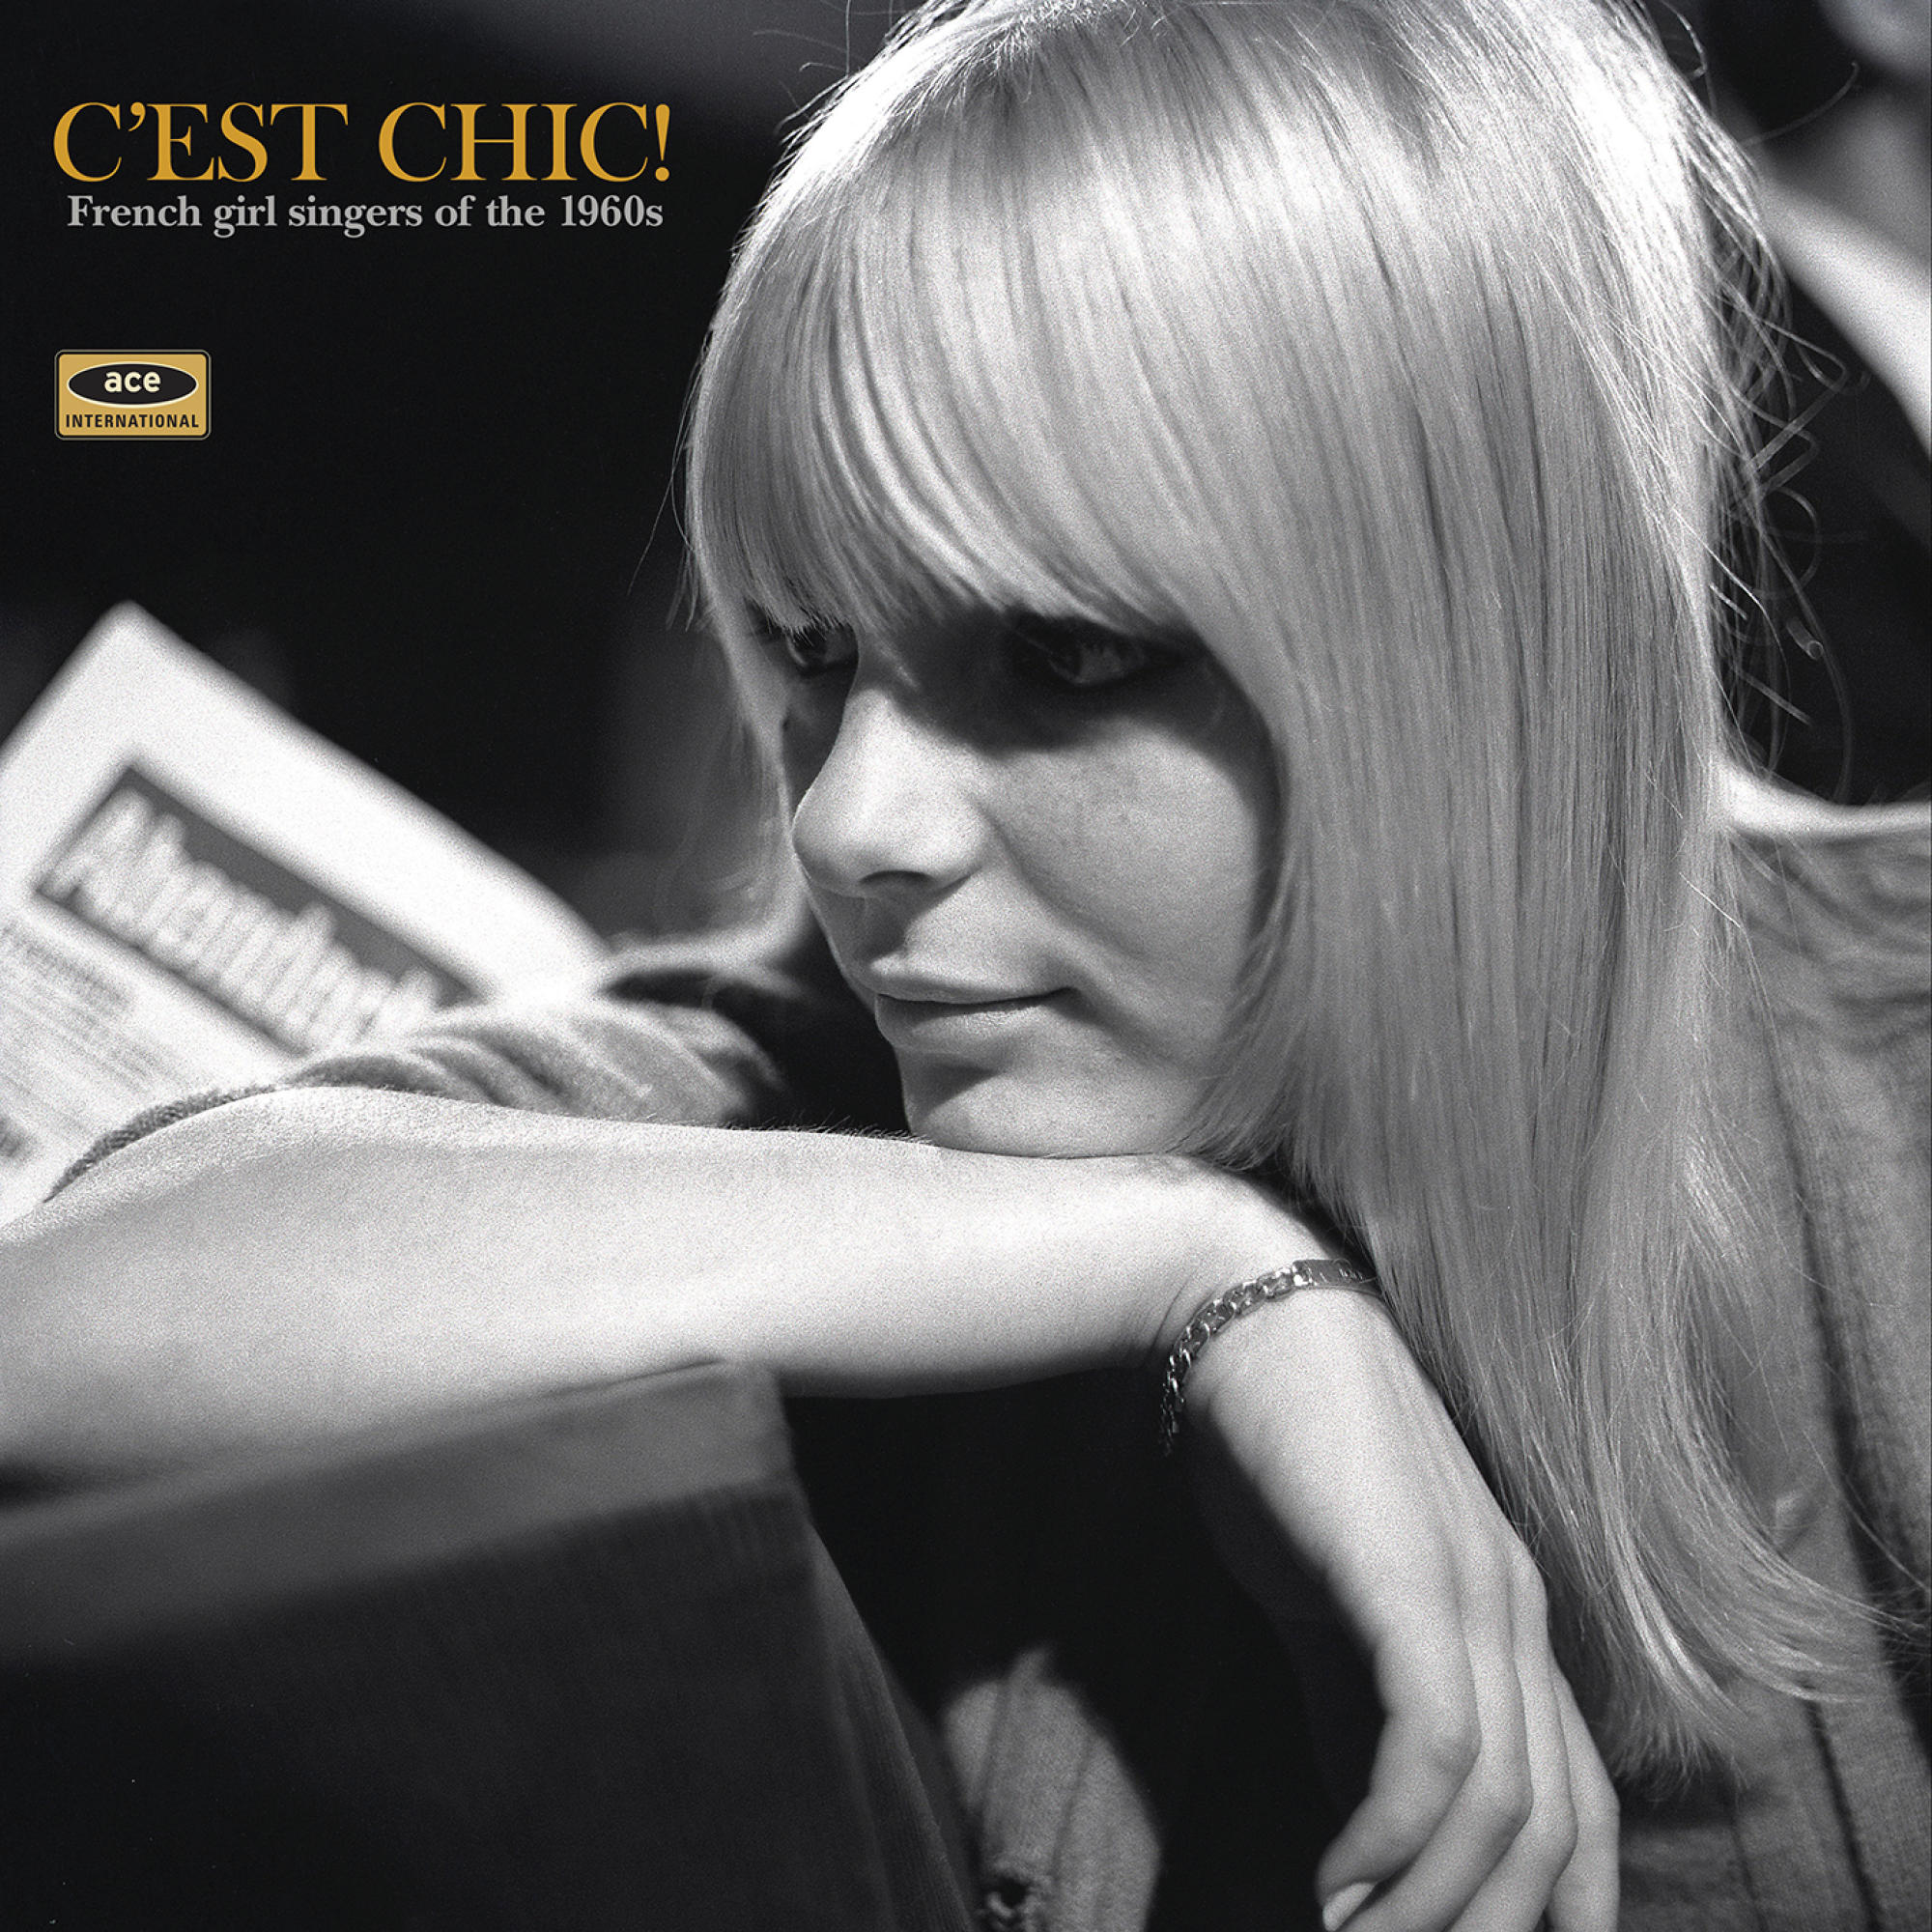 VARIOUS - 1960s Of Est The Girl French Chic! - (Vinyl) C\' Singers